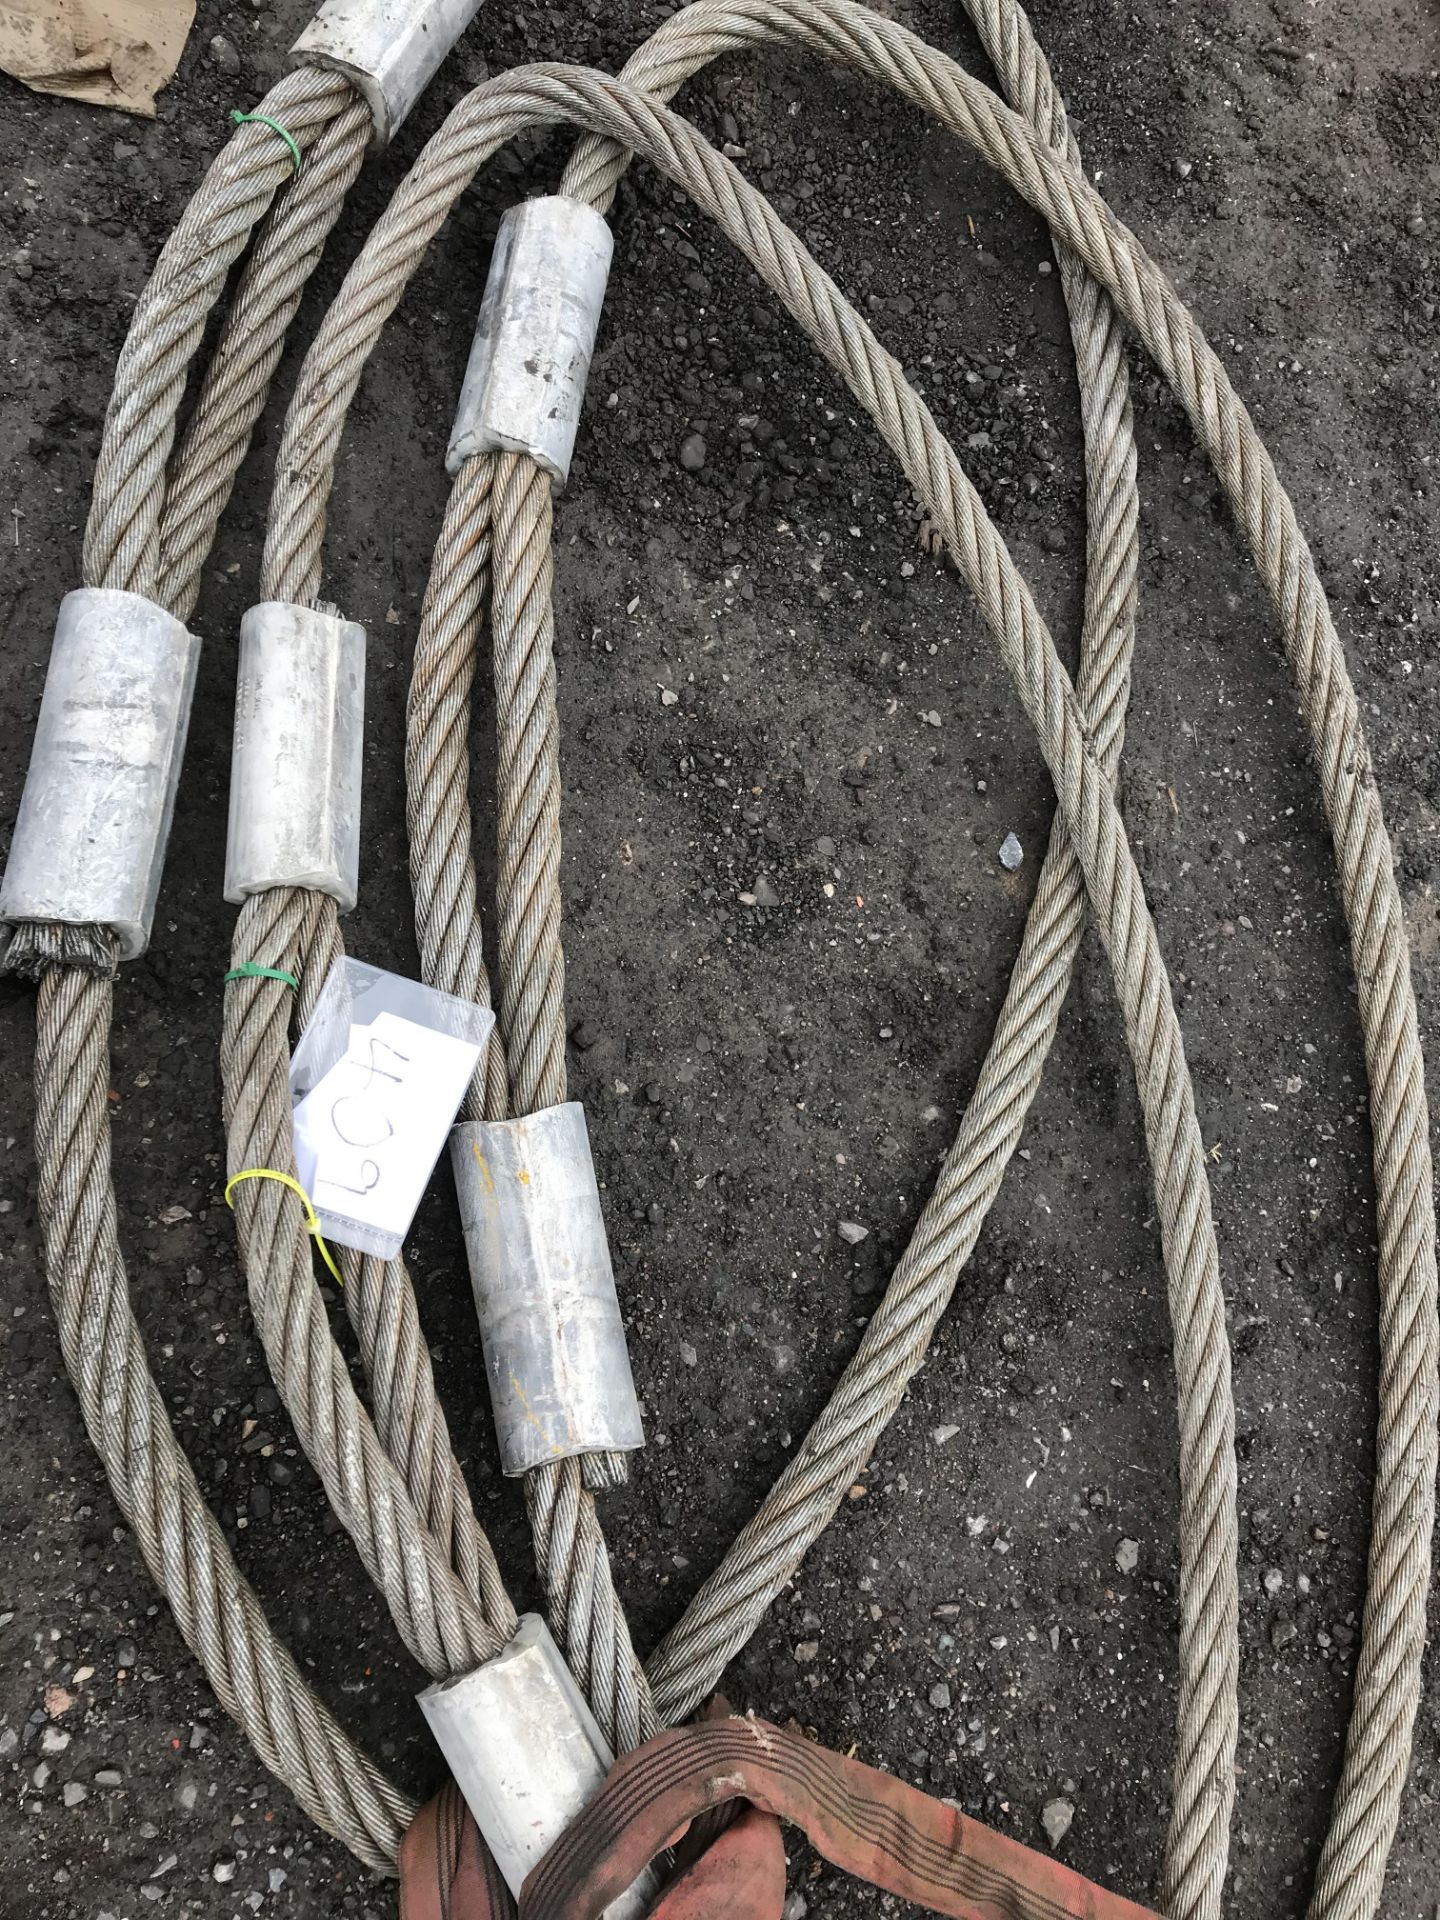 3 x 30t 2m circ endless wire rope sling / grommets